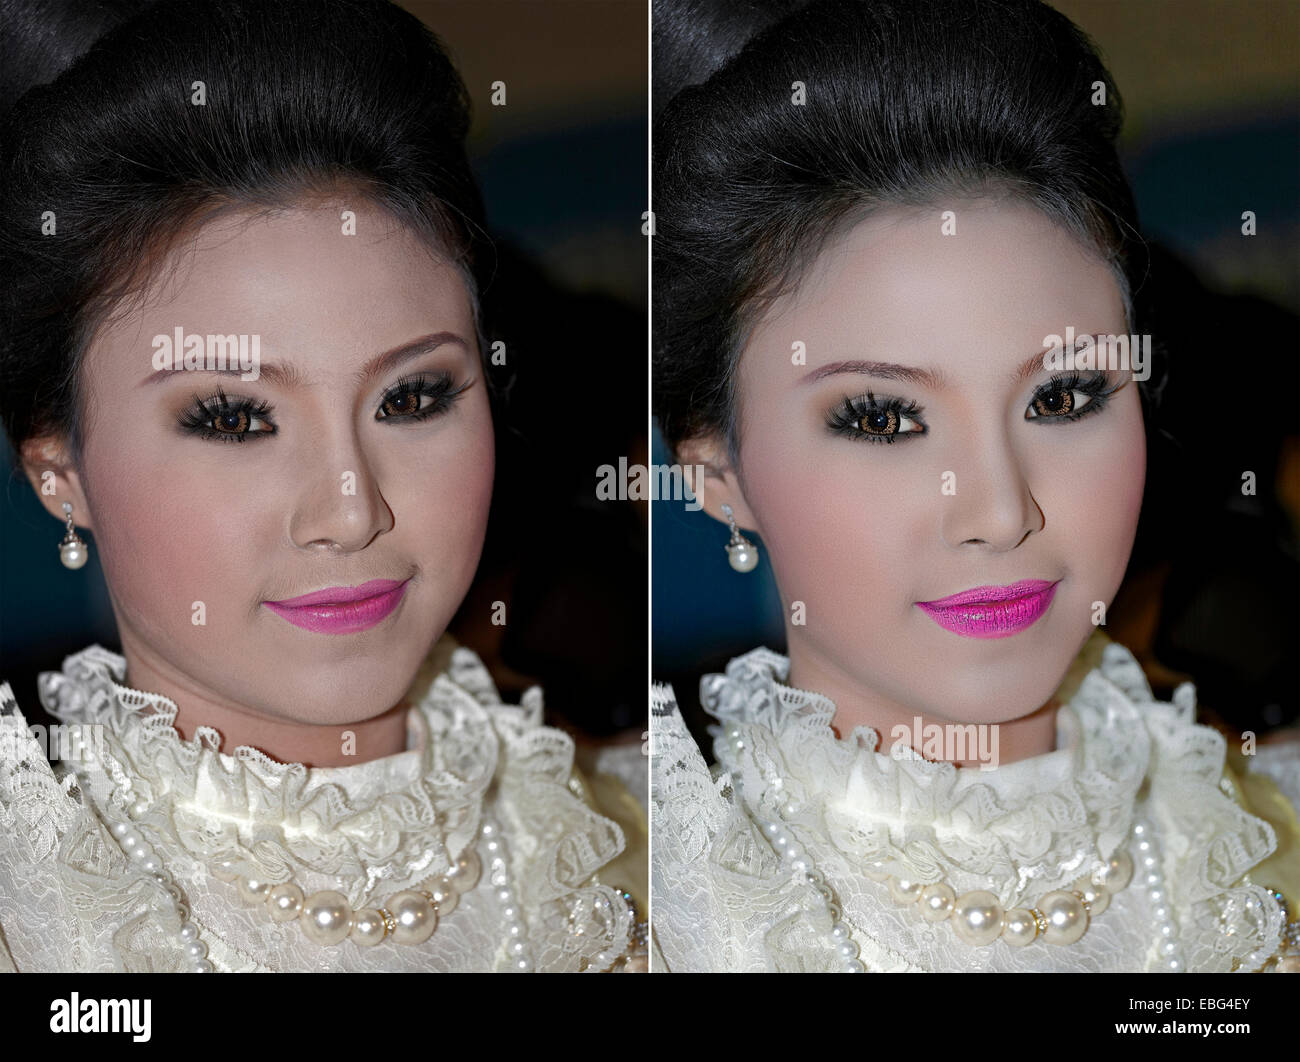 Before and after Photoshop manipulation image of a young Asian woman Stock Photo